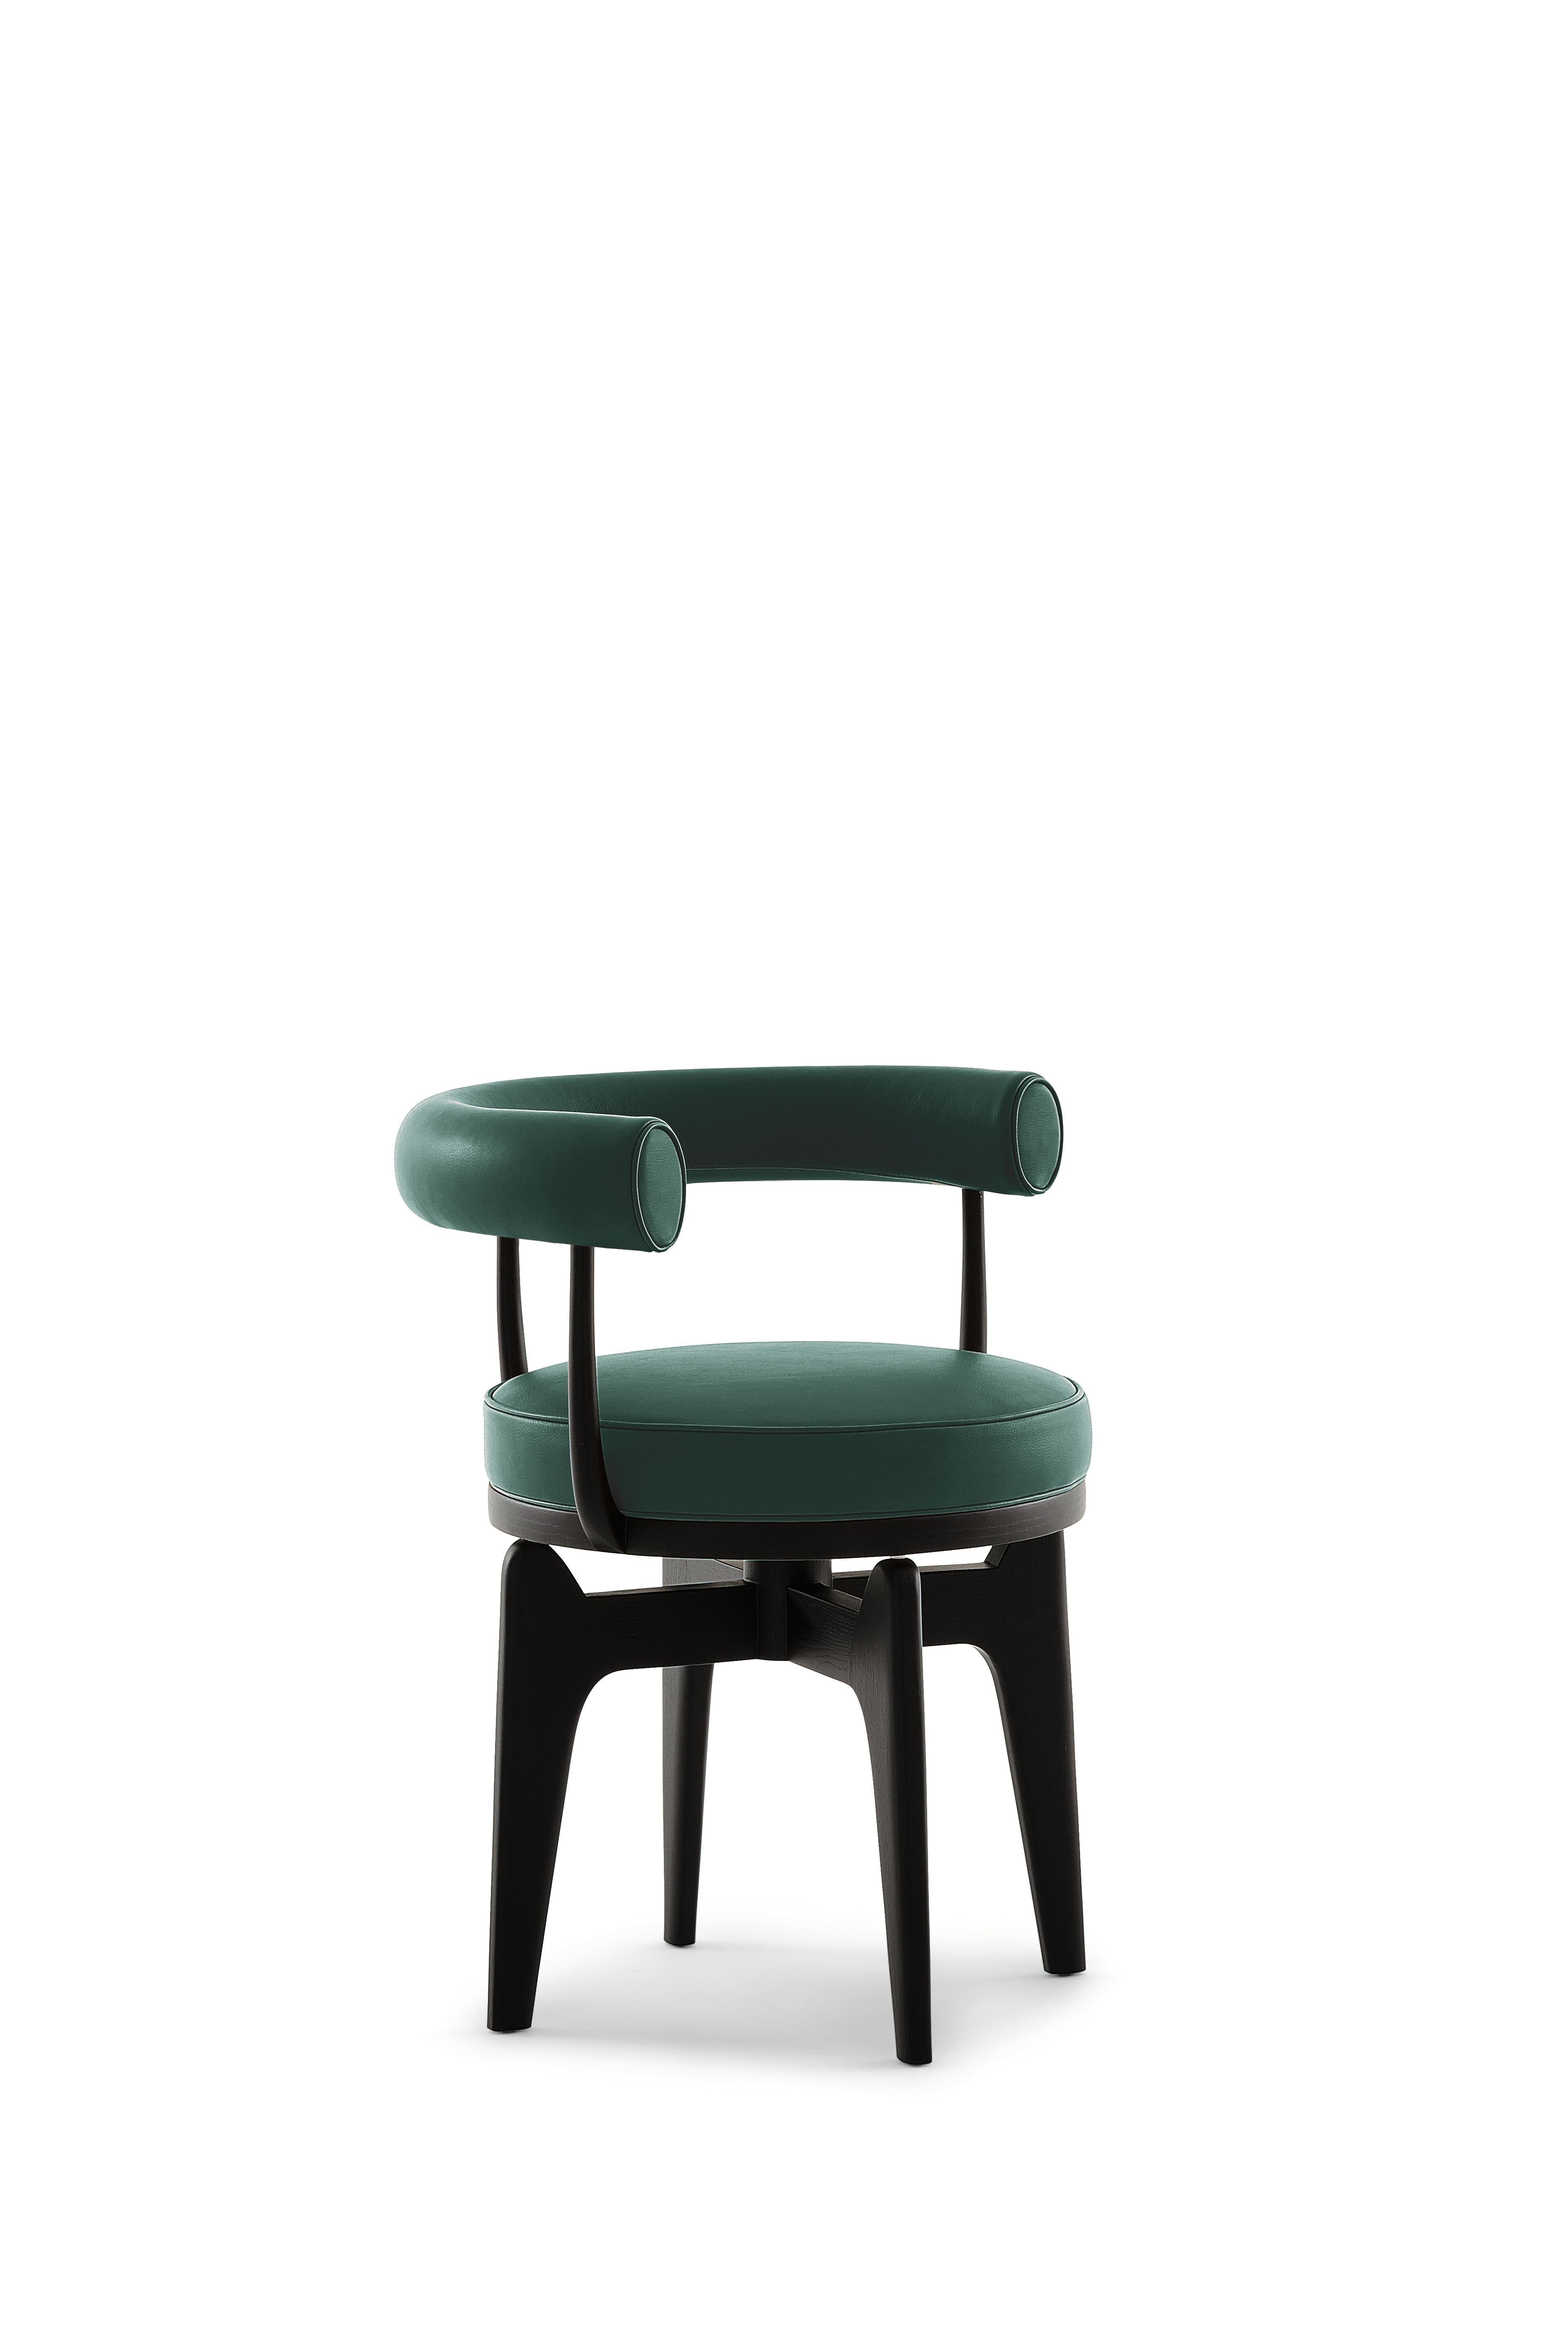 Mid-Century Modern Charlotte Perriand Fauteuil Indochine en vente